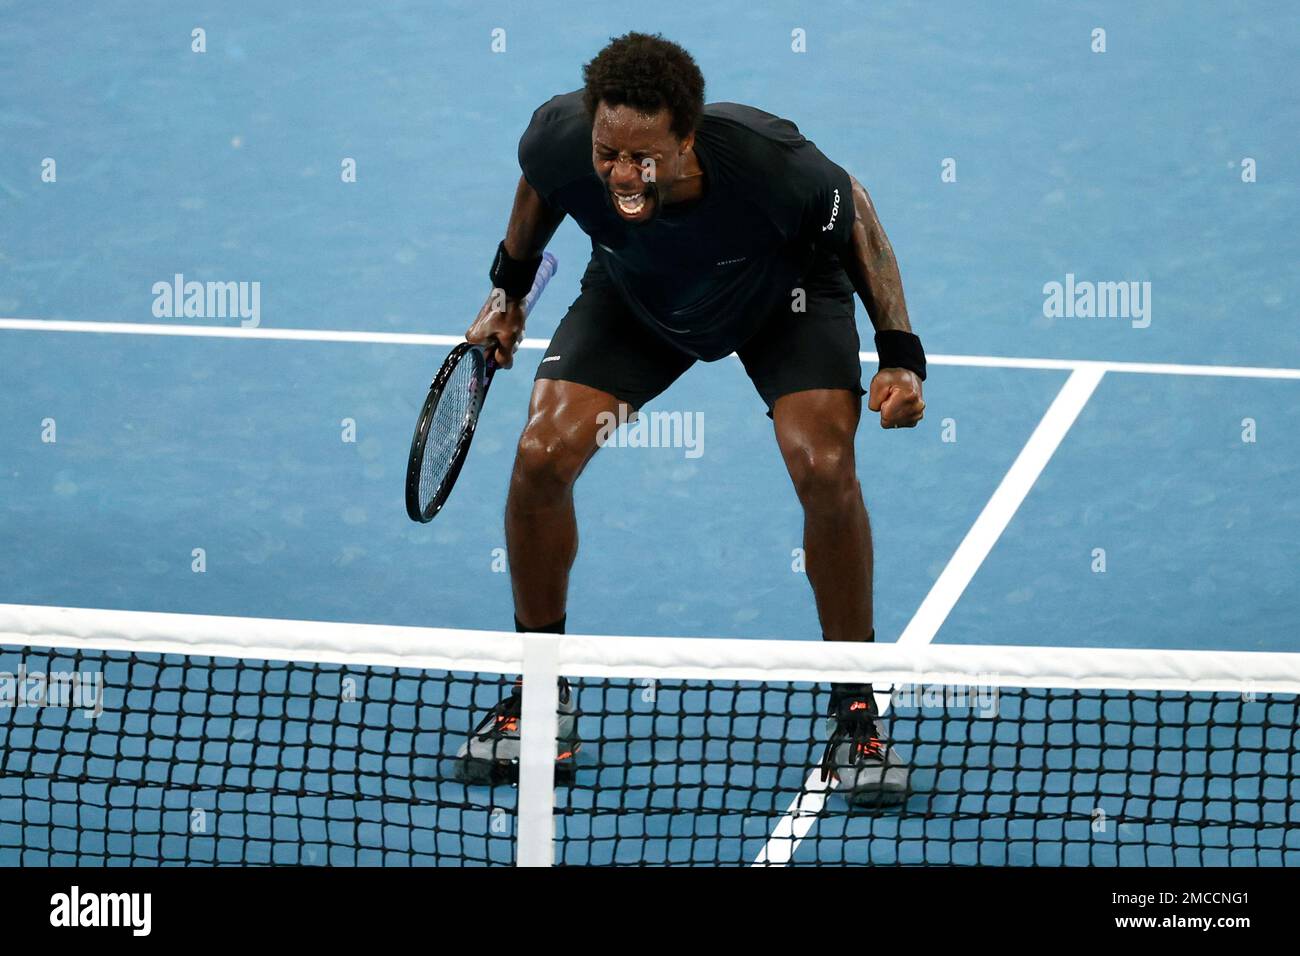 Gael Monfils of France celebrates after defeating Miomir Kecmanovic of Serbia in their fourth round match at the Australian Open tennis championships in Melbourne, Australia, Sunday, Jan